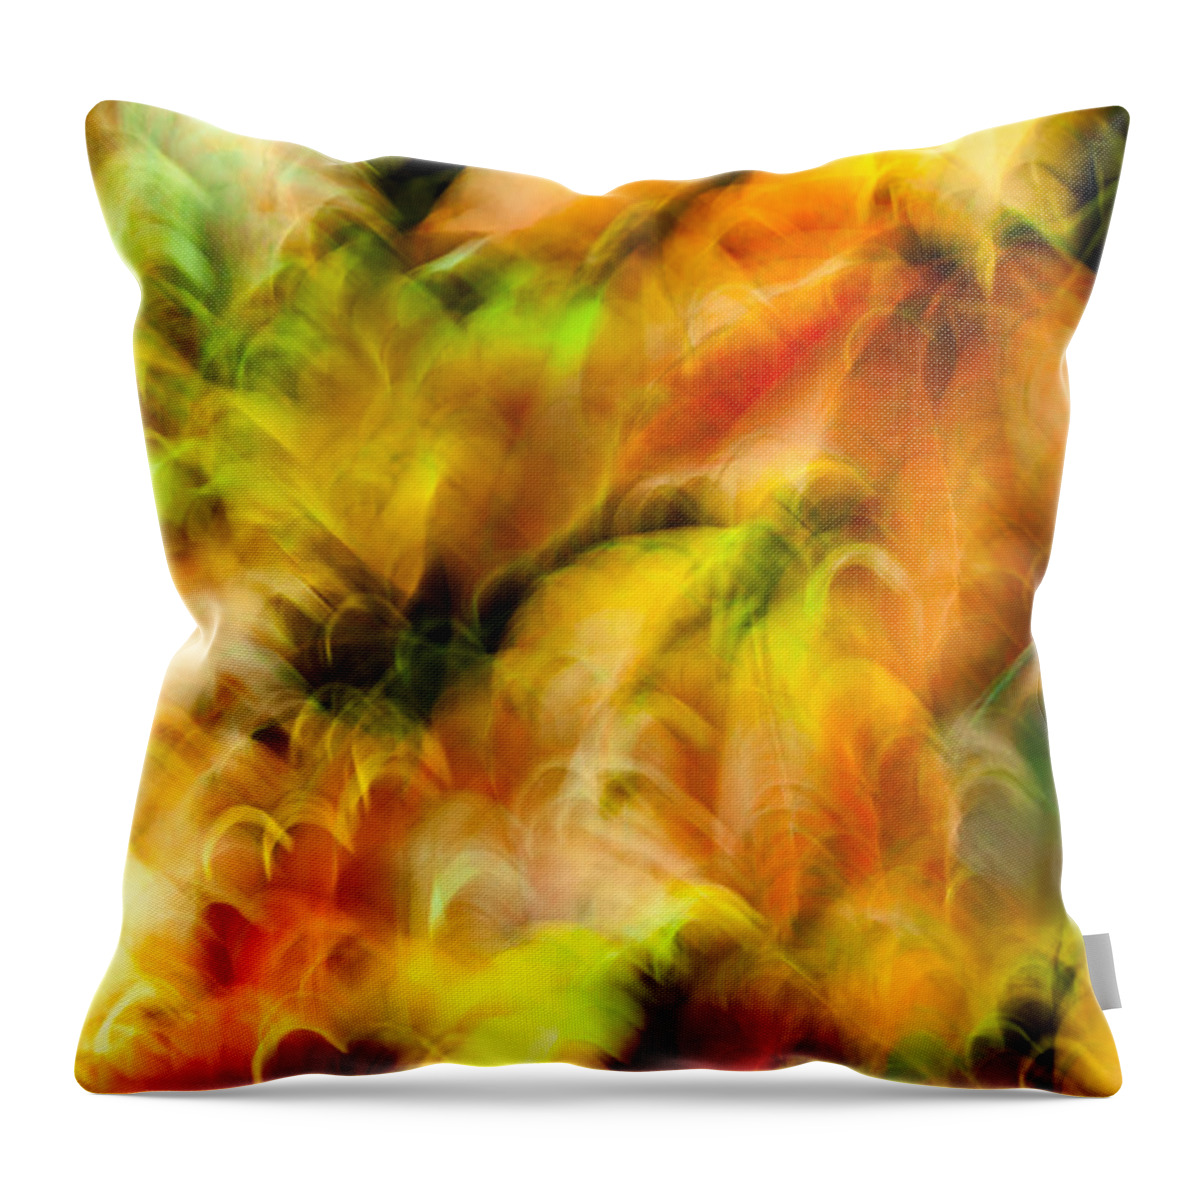 Leaves Throw Pillow featuring the photograph Enchantment No.6 by Daniel Csoka